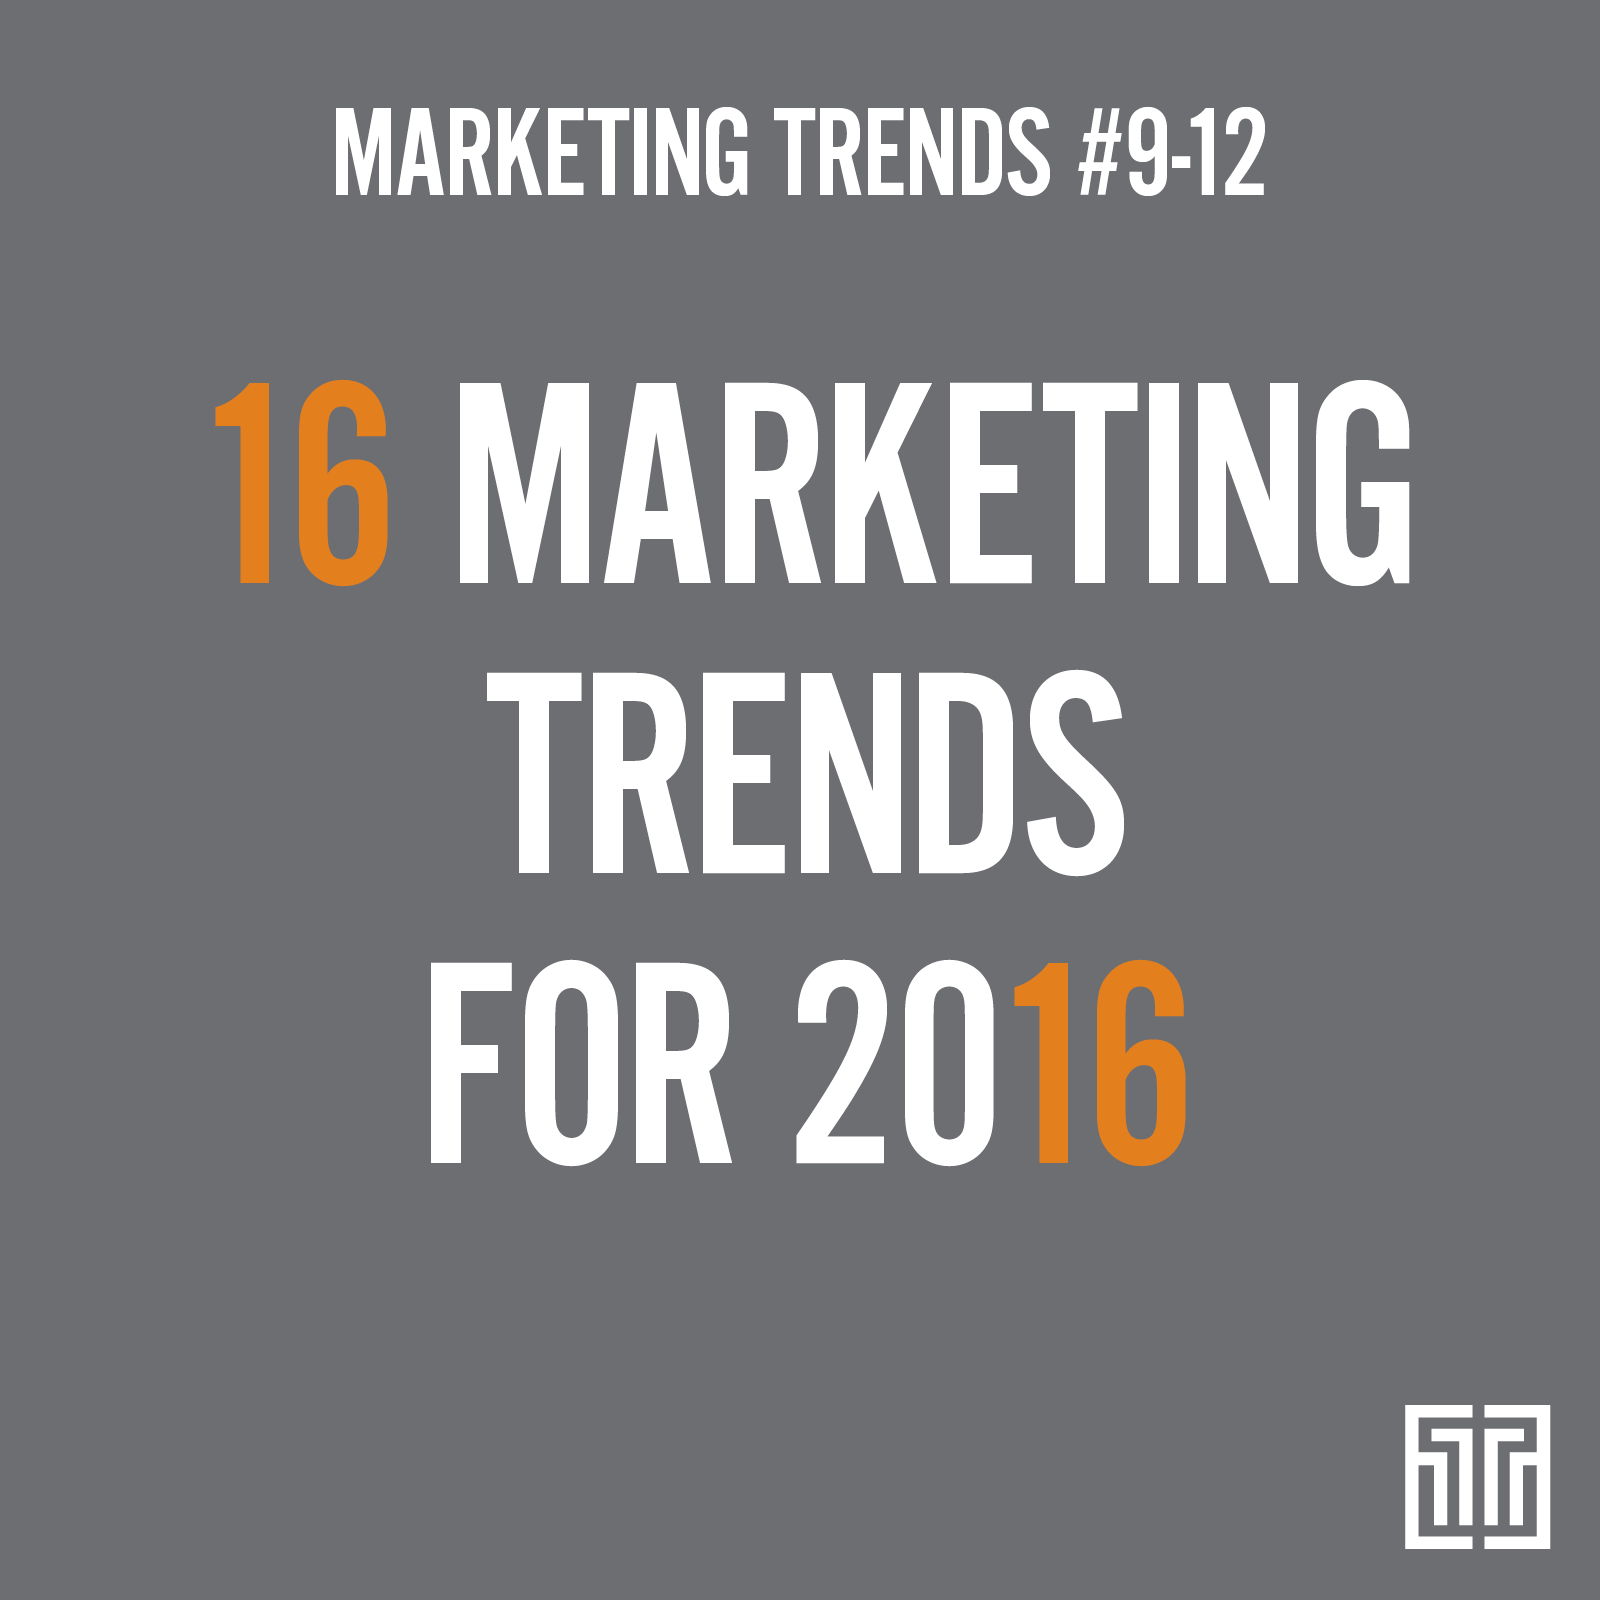 16 Marketing Trends for 2016: Trends 9-12